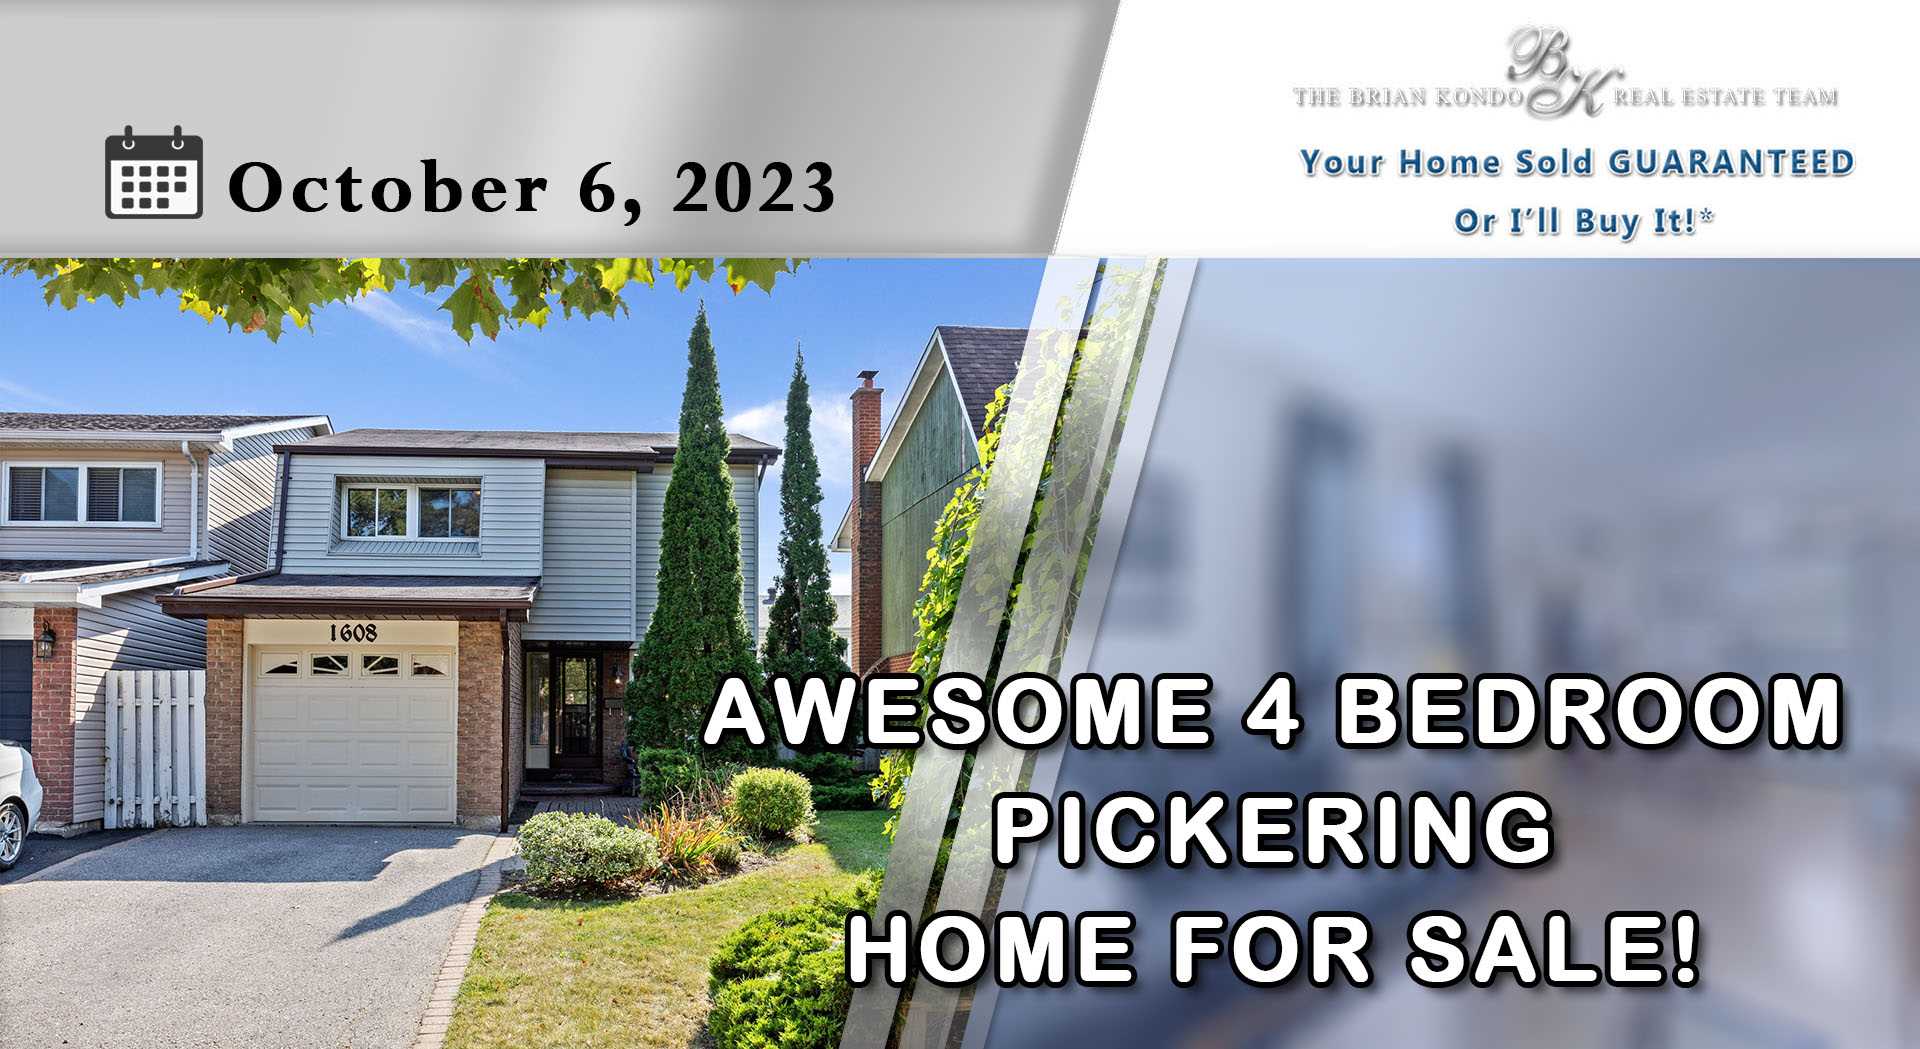 AWESOME 4 BEDROOM PICKERING HOME FOR SALE!